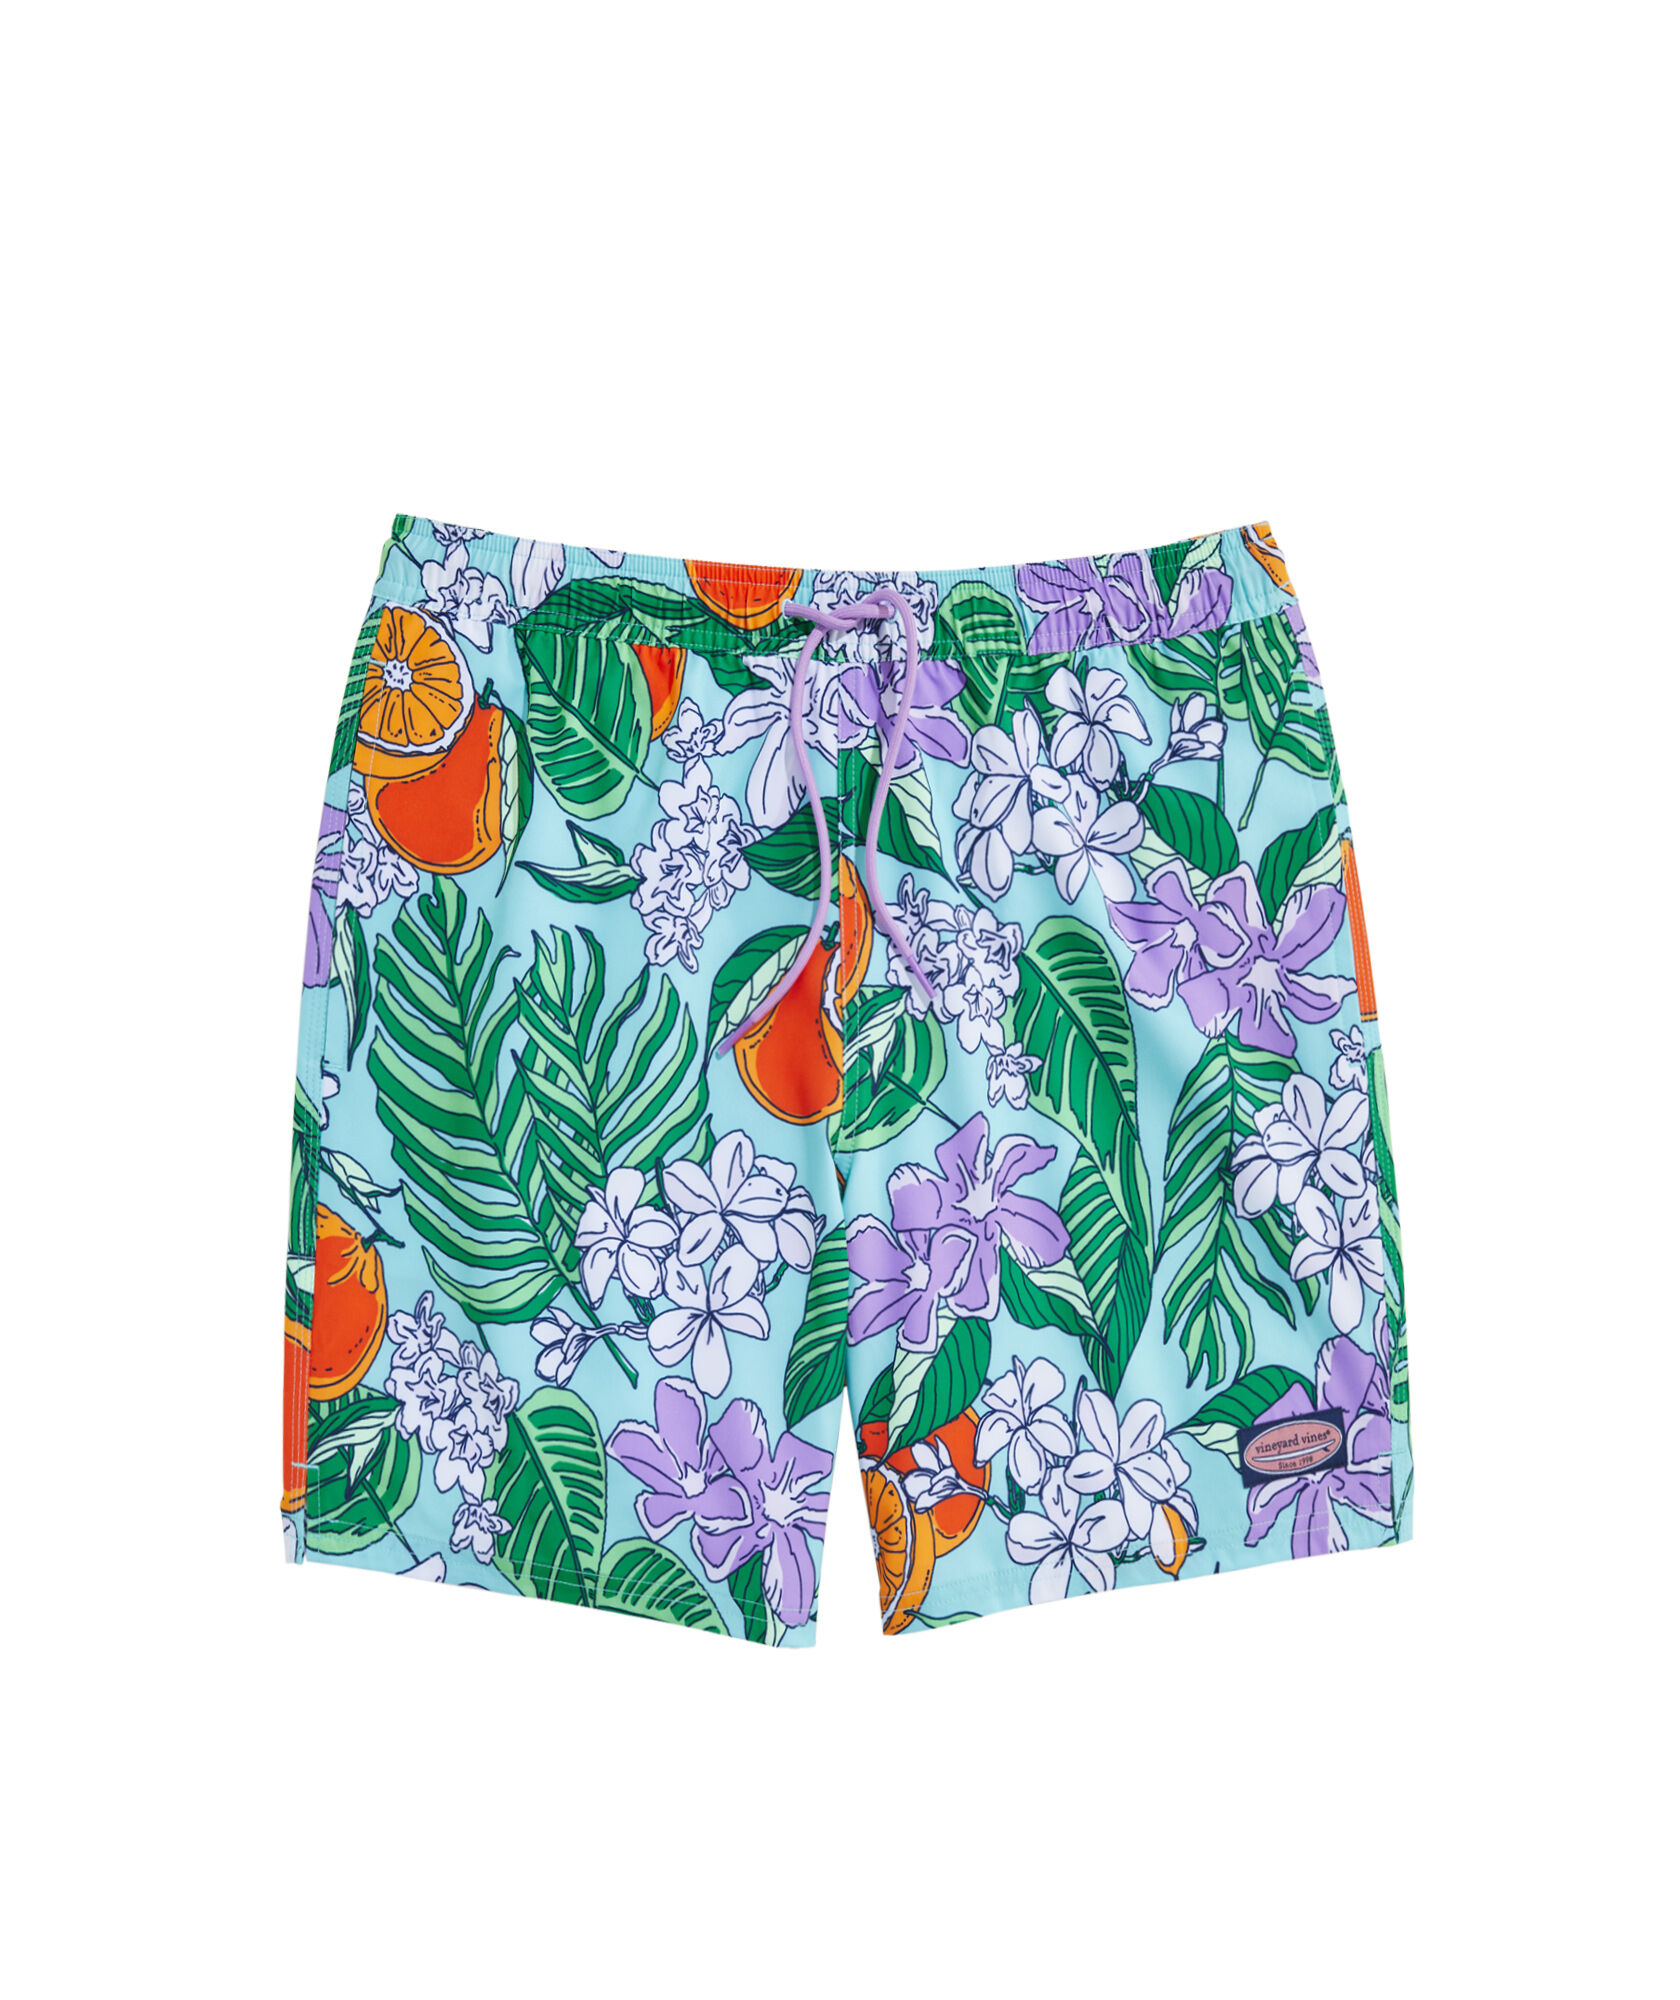 OUTLET Boys' Printed Chappy Swim Trunks